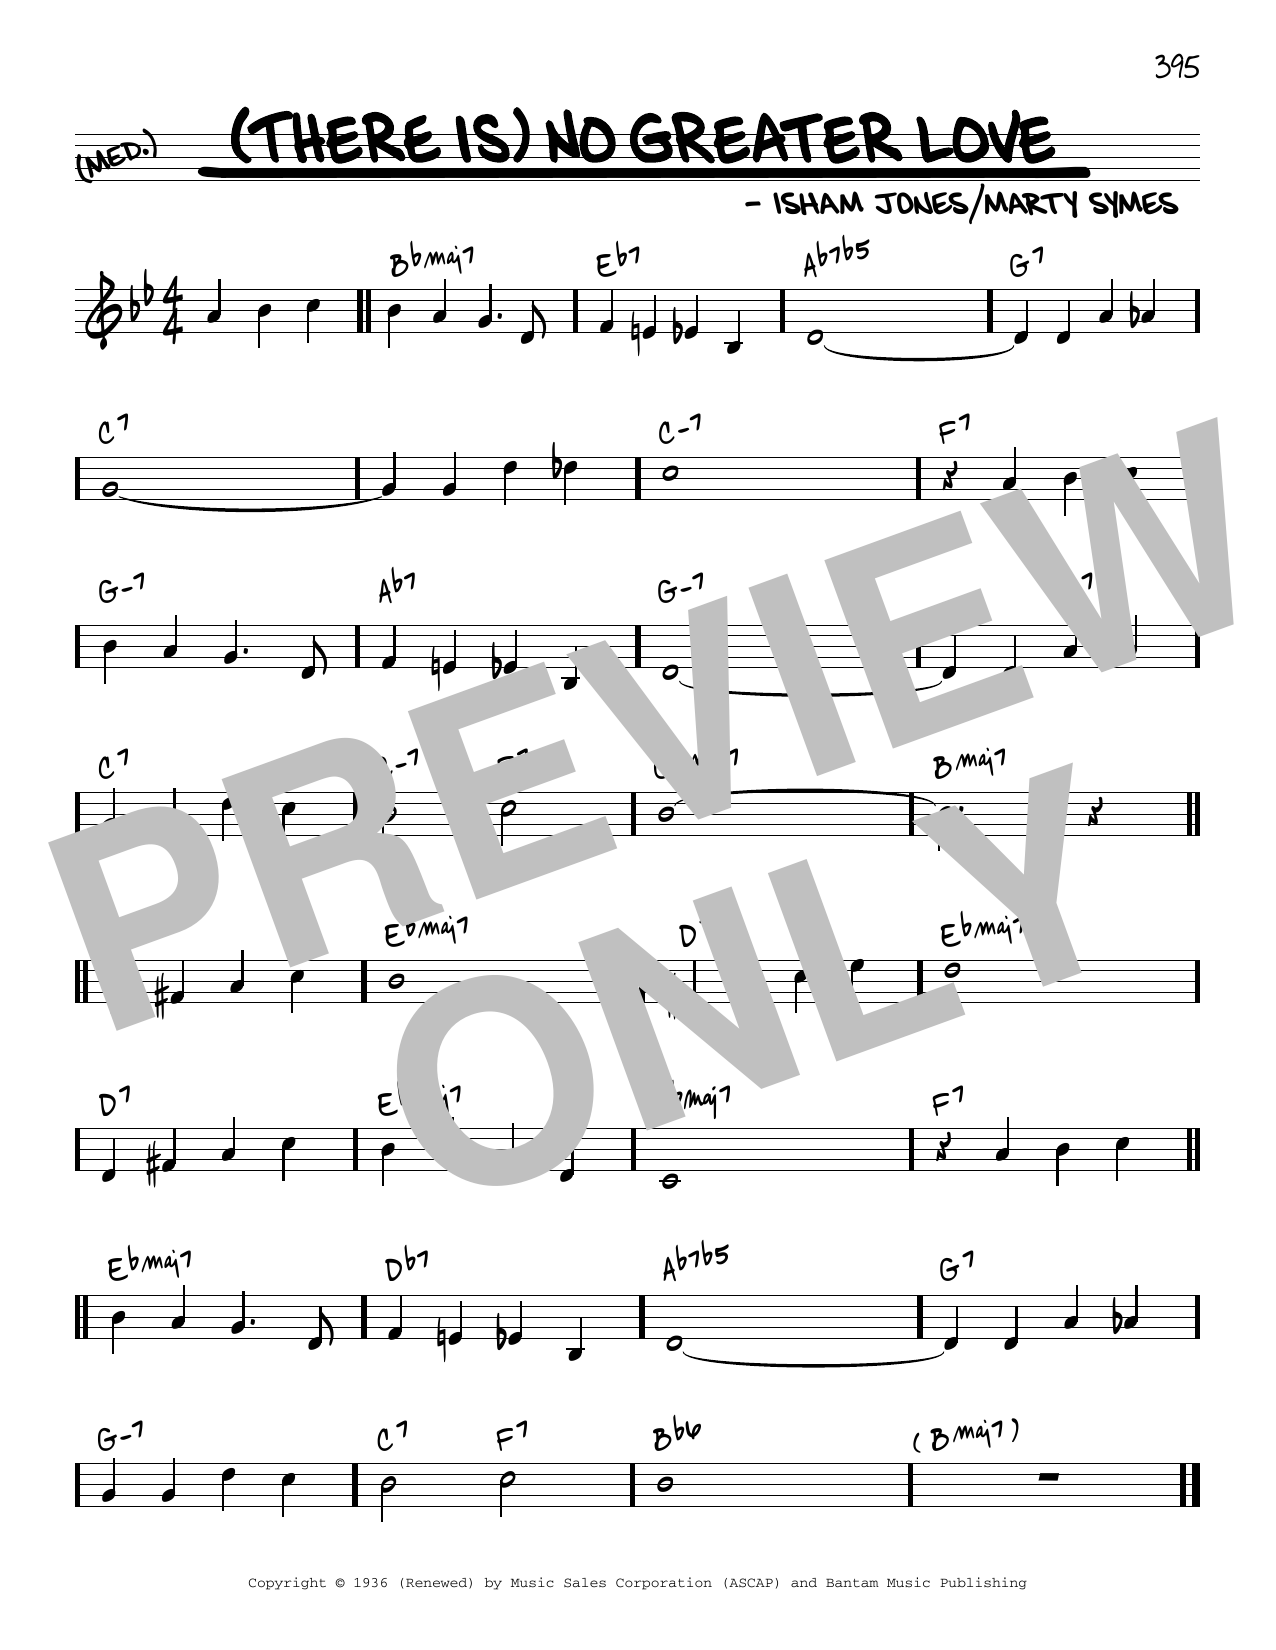 Download Marty Symes (There Is) No Greater Love [Reharmonize Sheet Music